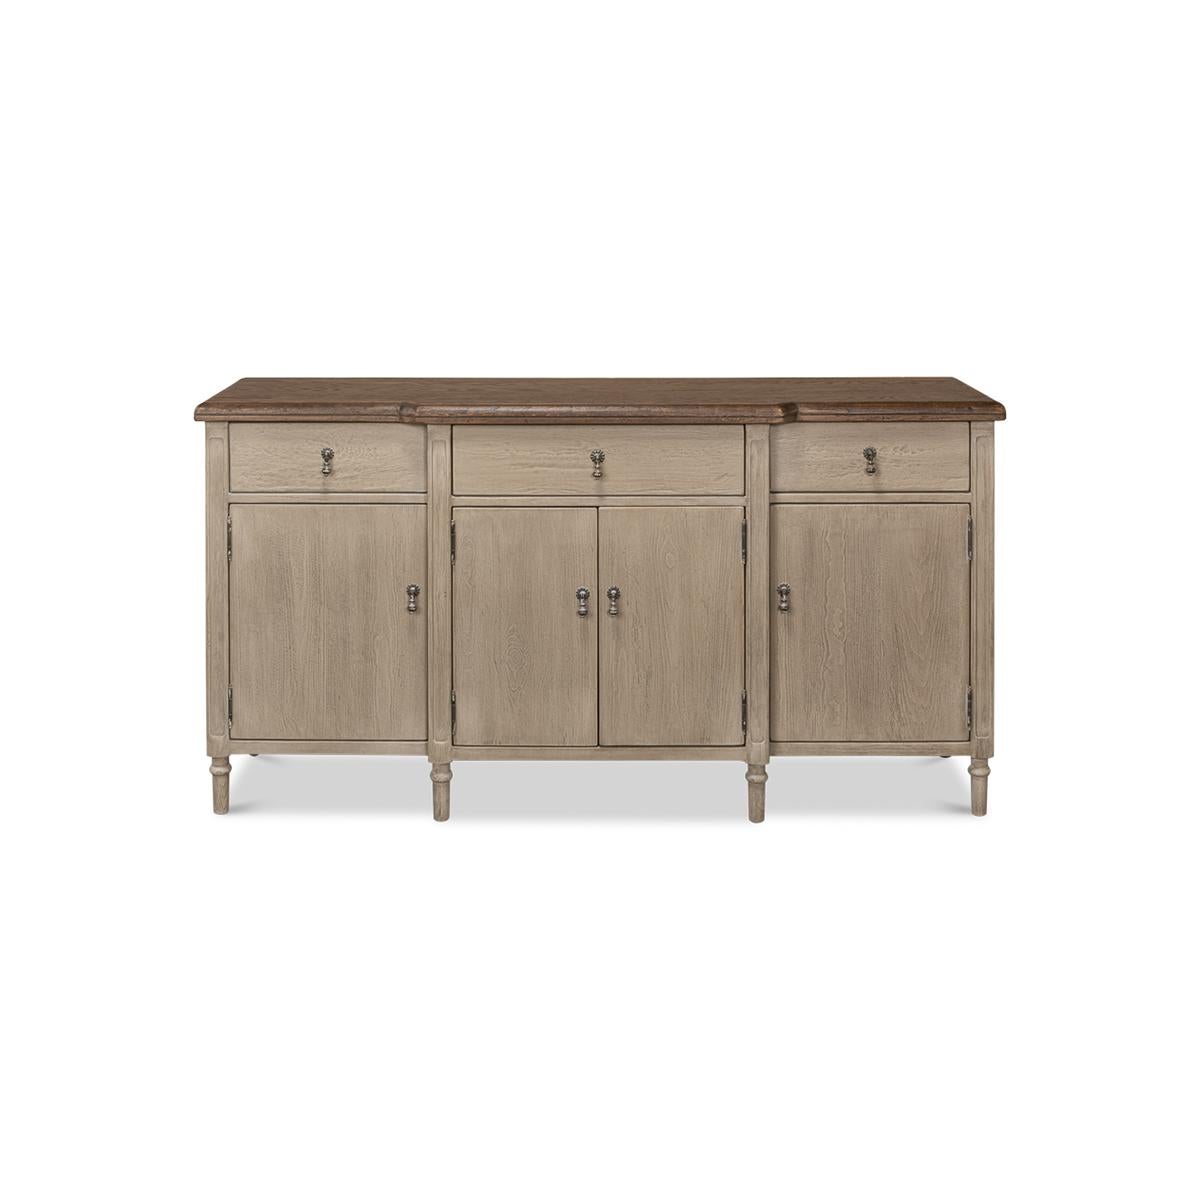 The perfect addition to any elegant and sophisticated dining or living space, this beautiful piece boasts a natural finish oak top with a molded edge, creating a sleek and refined look. The top is contrasted by a soft grey painted base that adds a